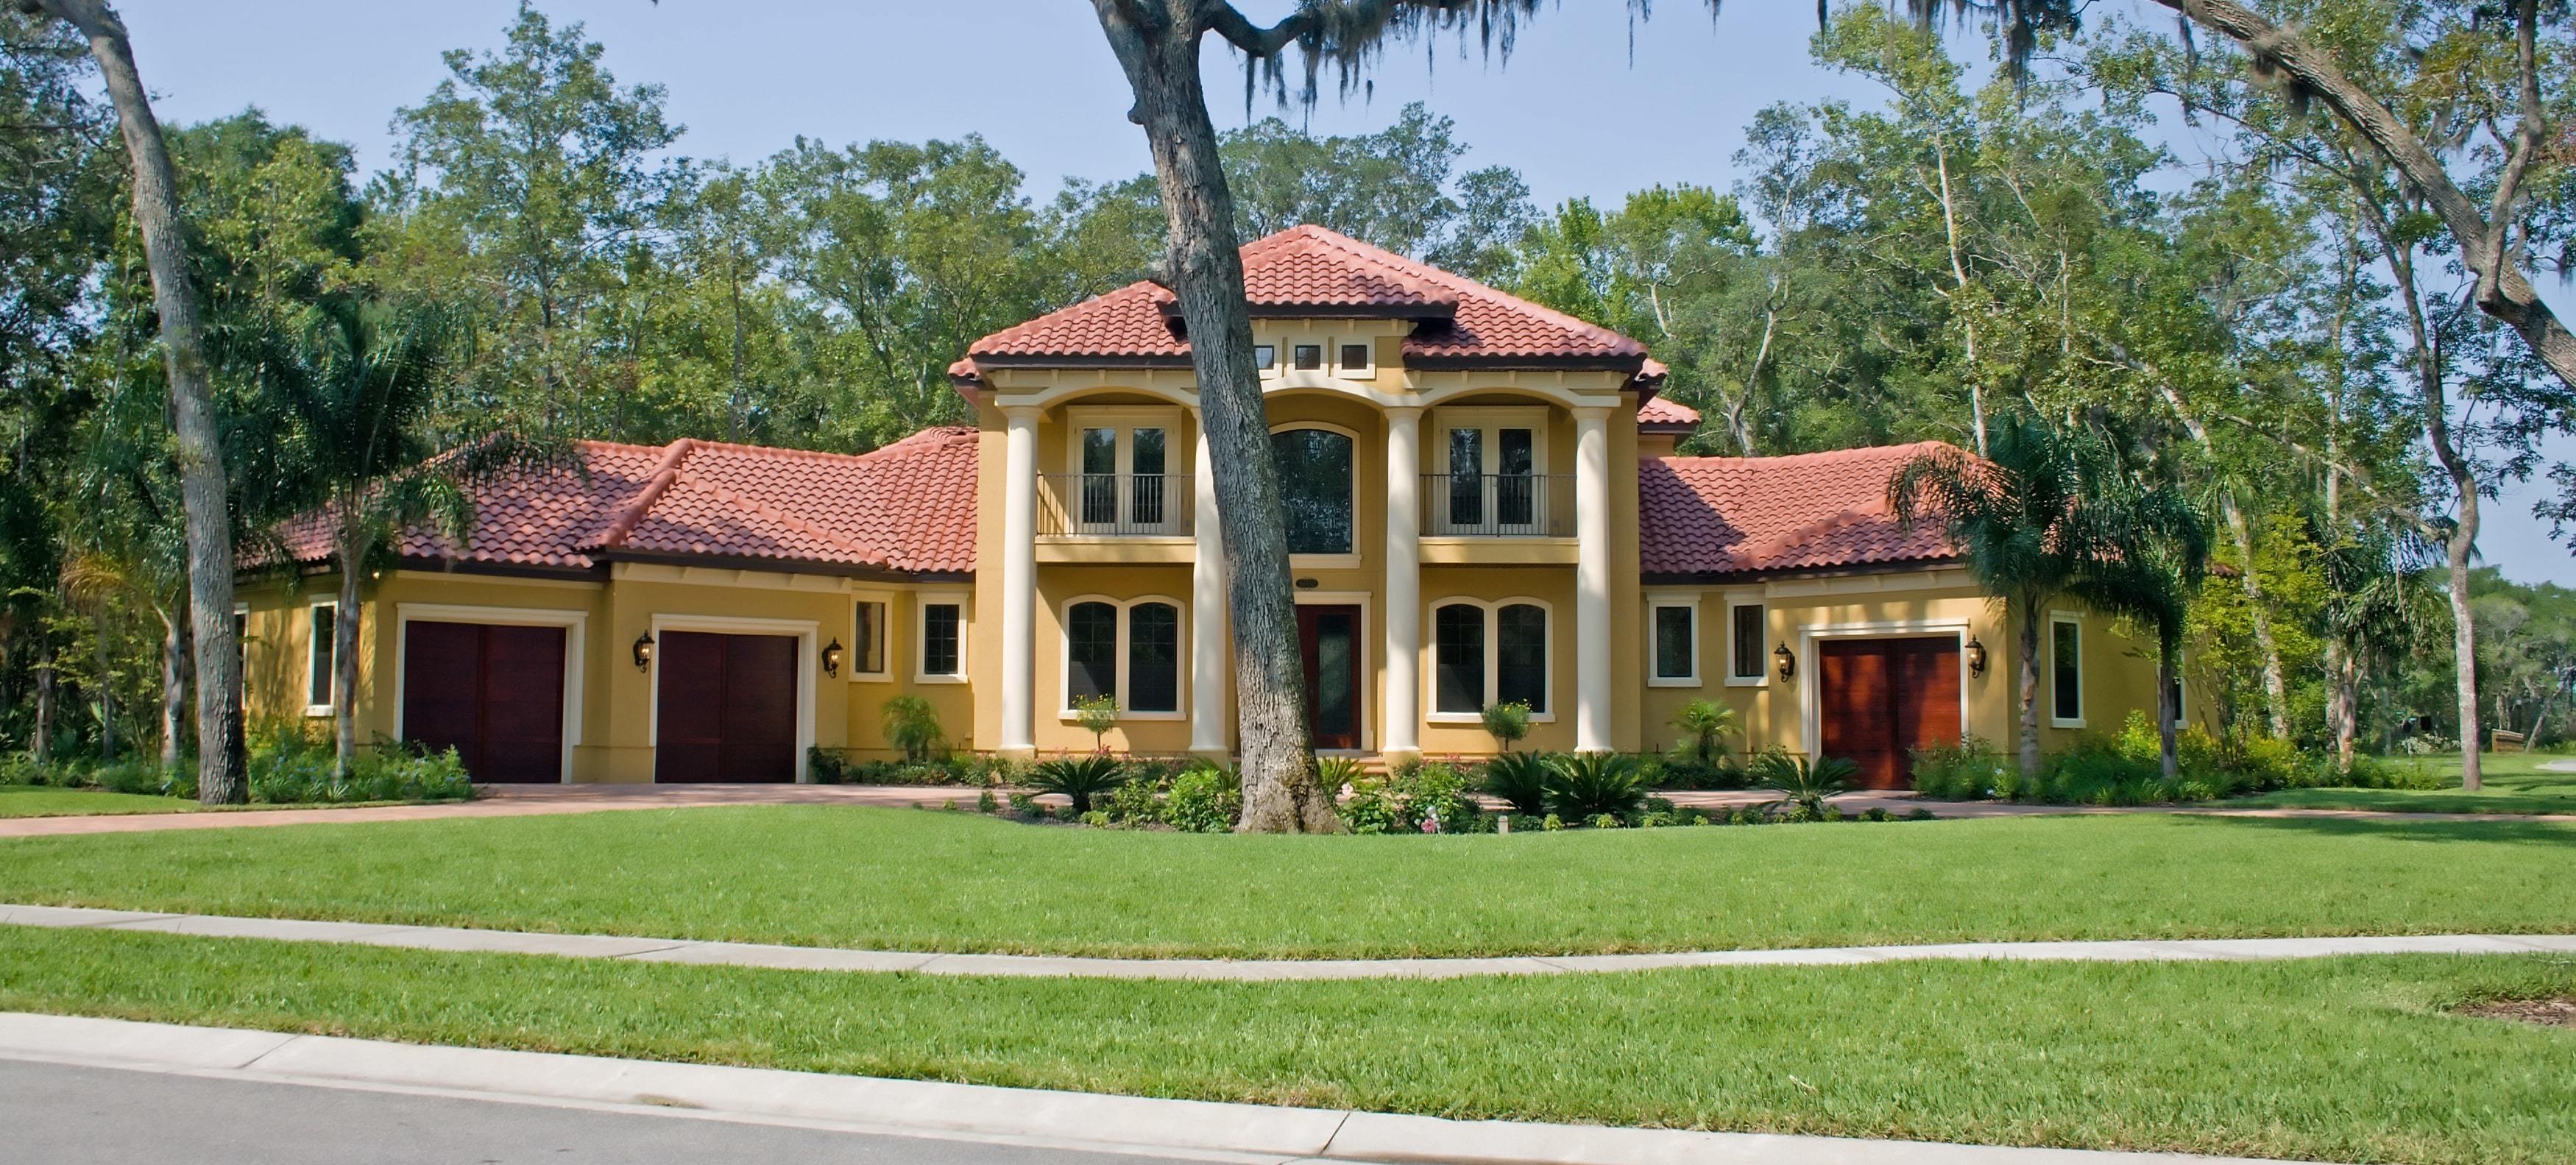 Tile roofed luxury estate style home under shady oak trees in Riverstone, FL.